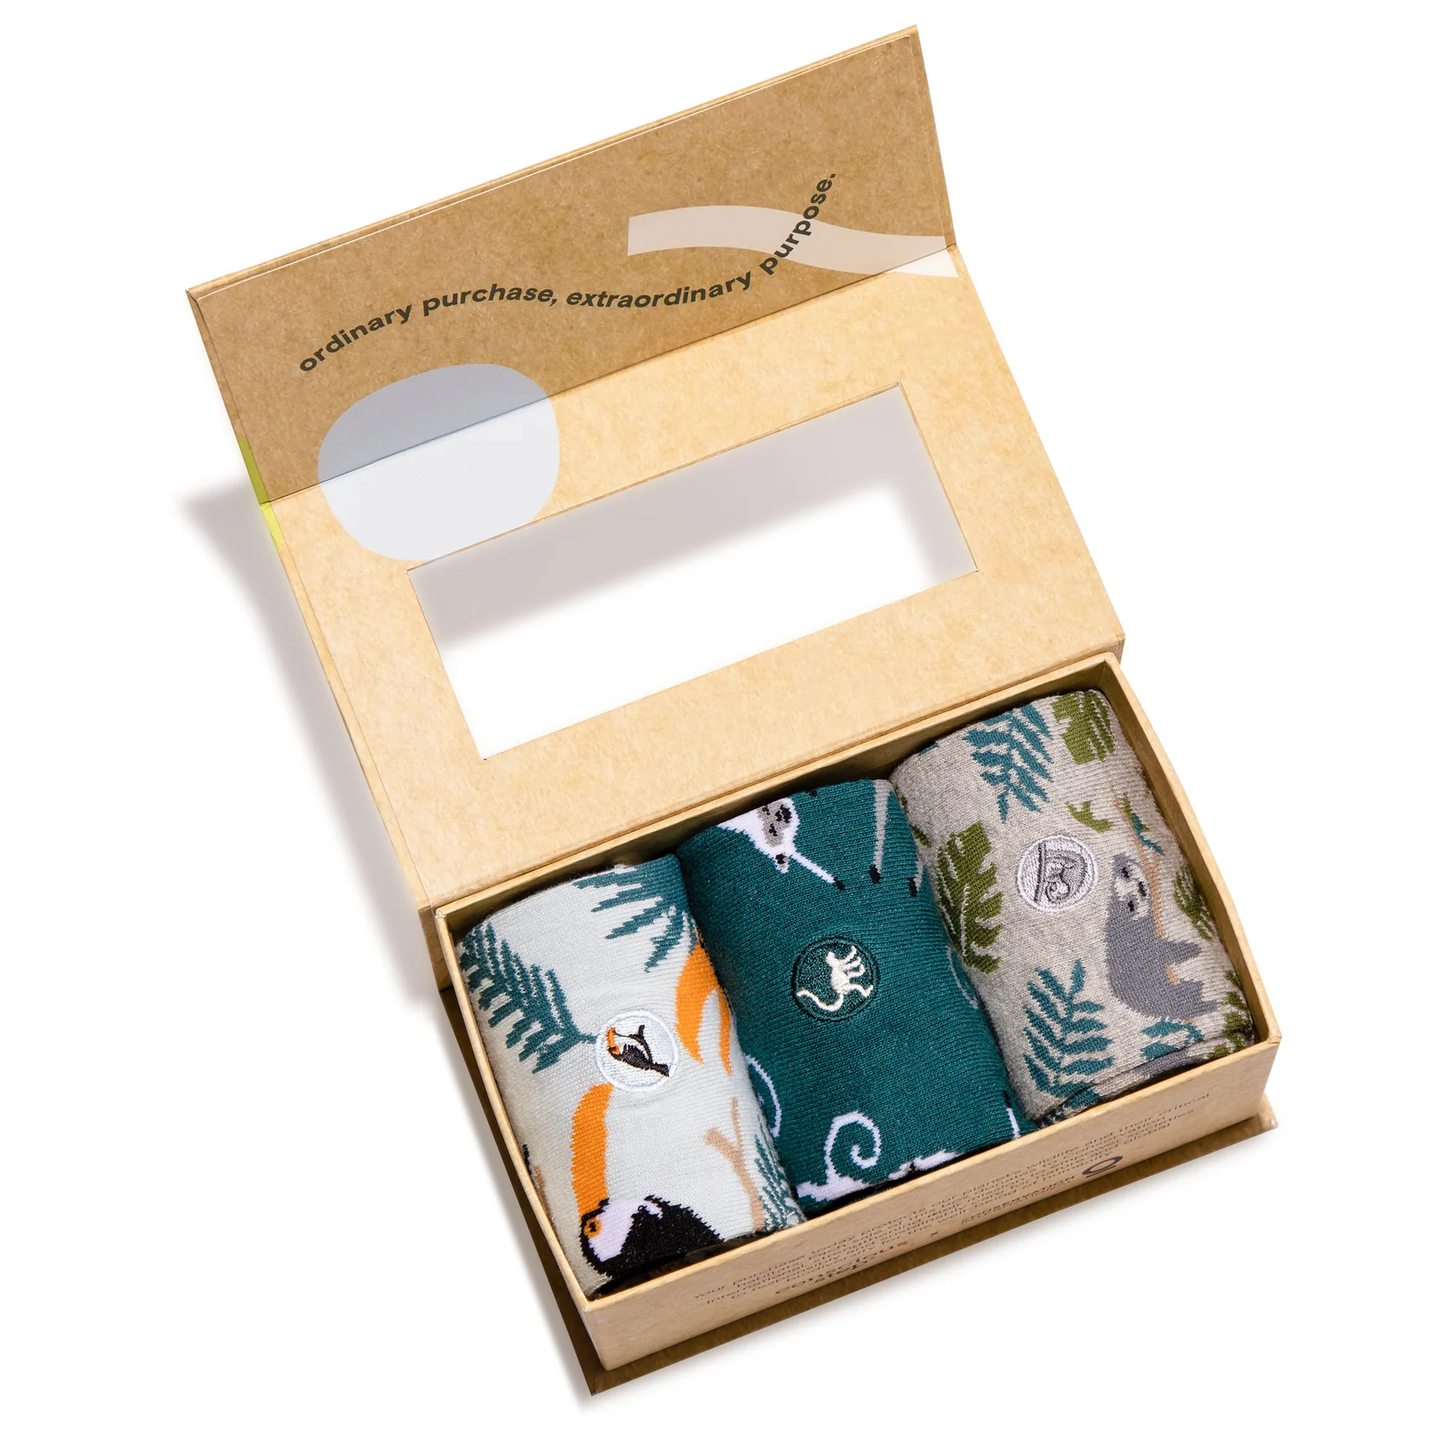 Conscious Step - Gift Box: Socks that protect Rainforests